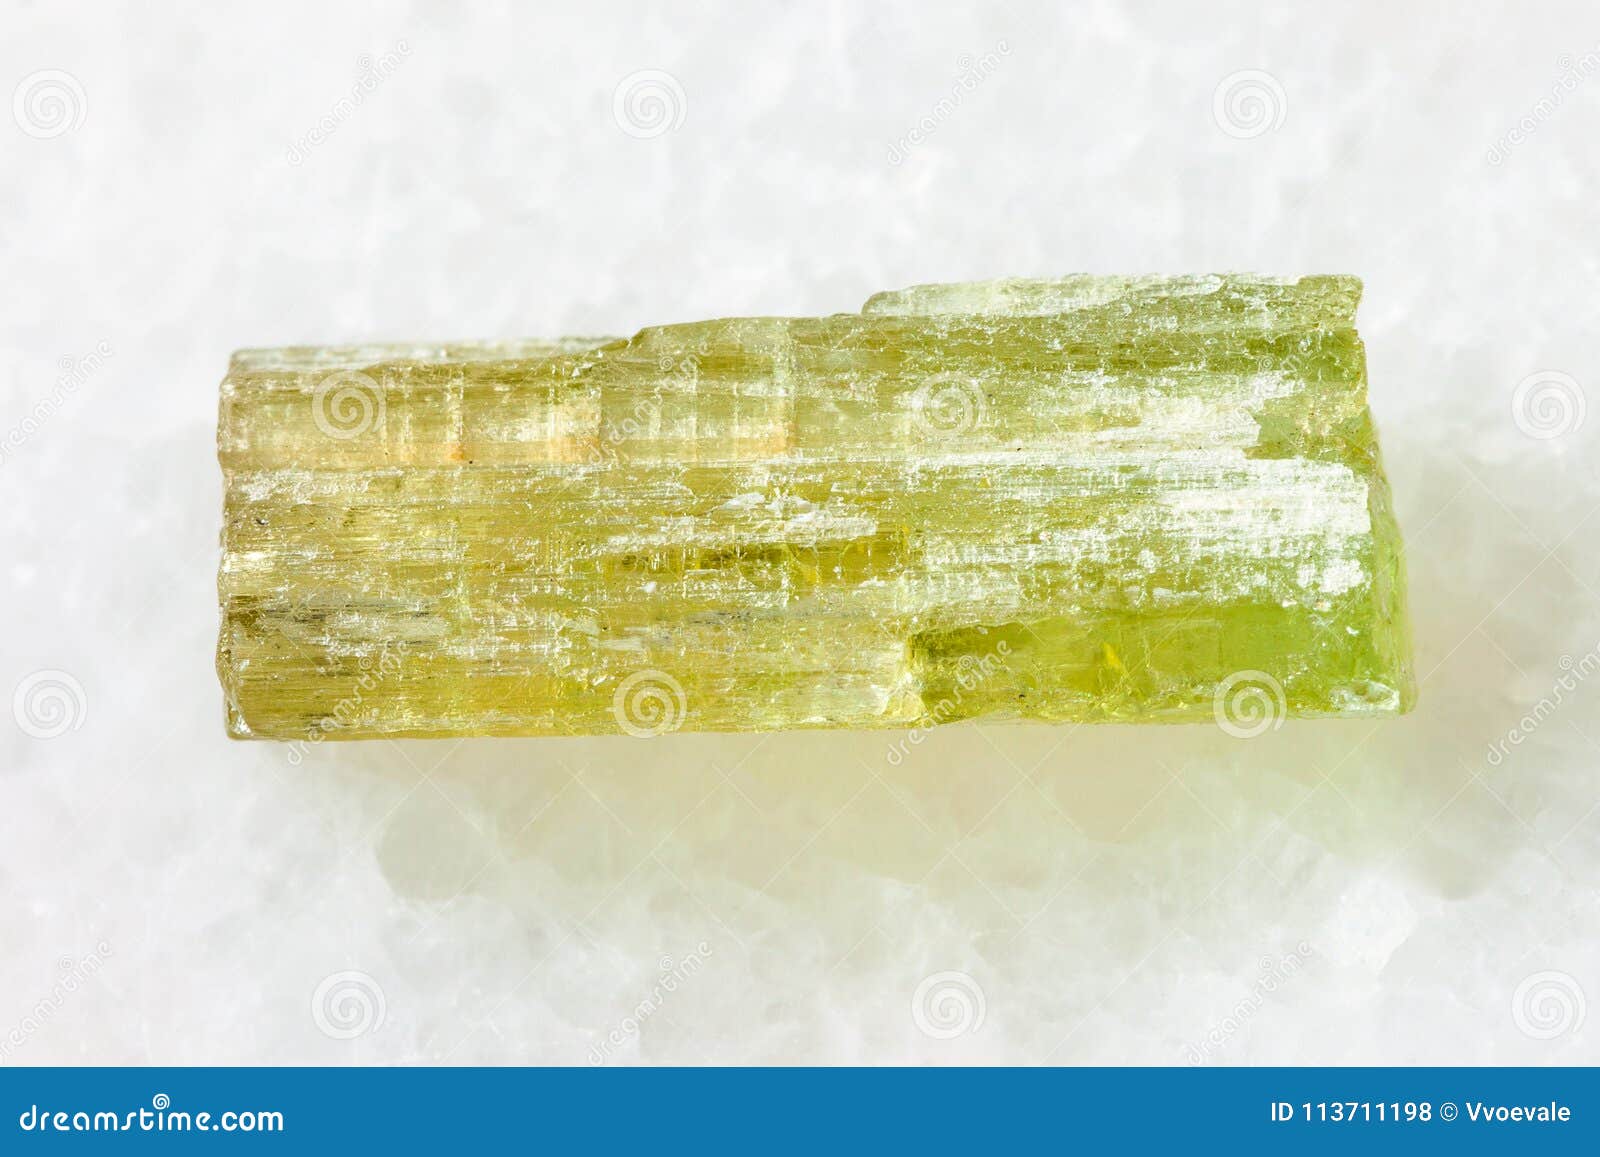 Rough Crystal of Heliodor (yellow Beryl) on White Stock Photo - Image ...